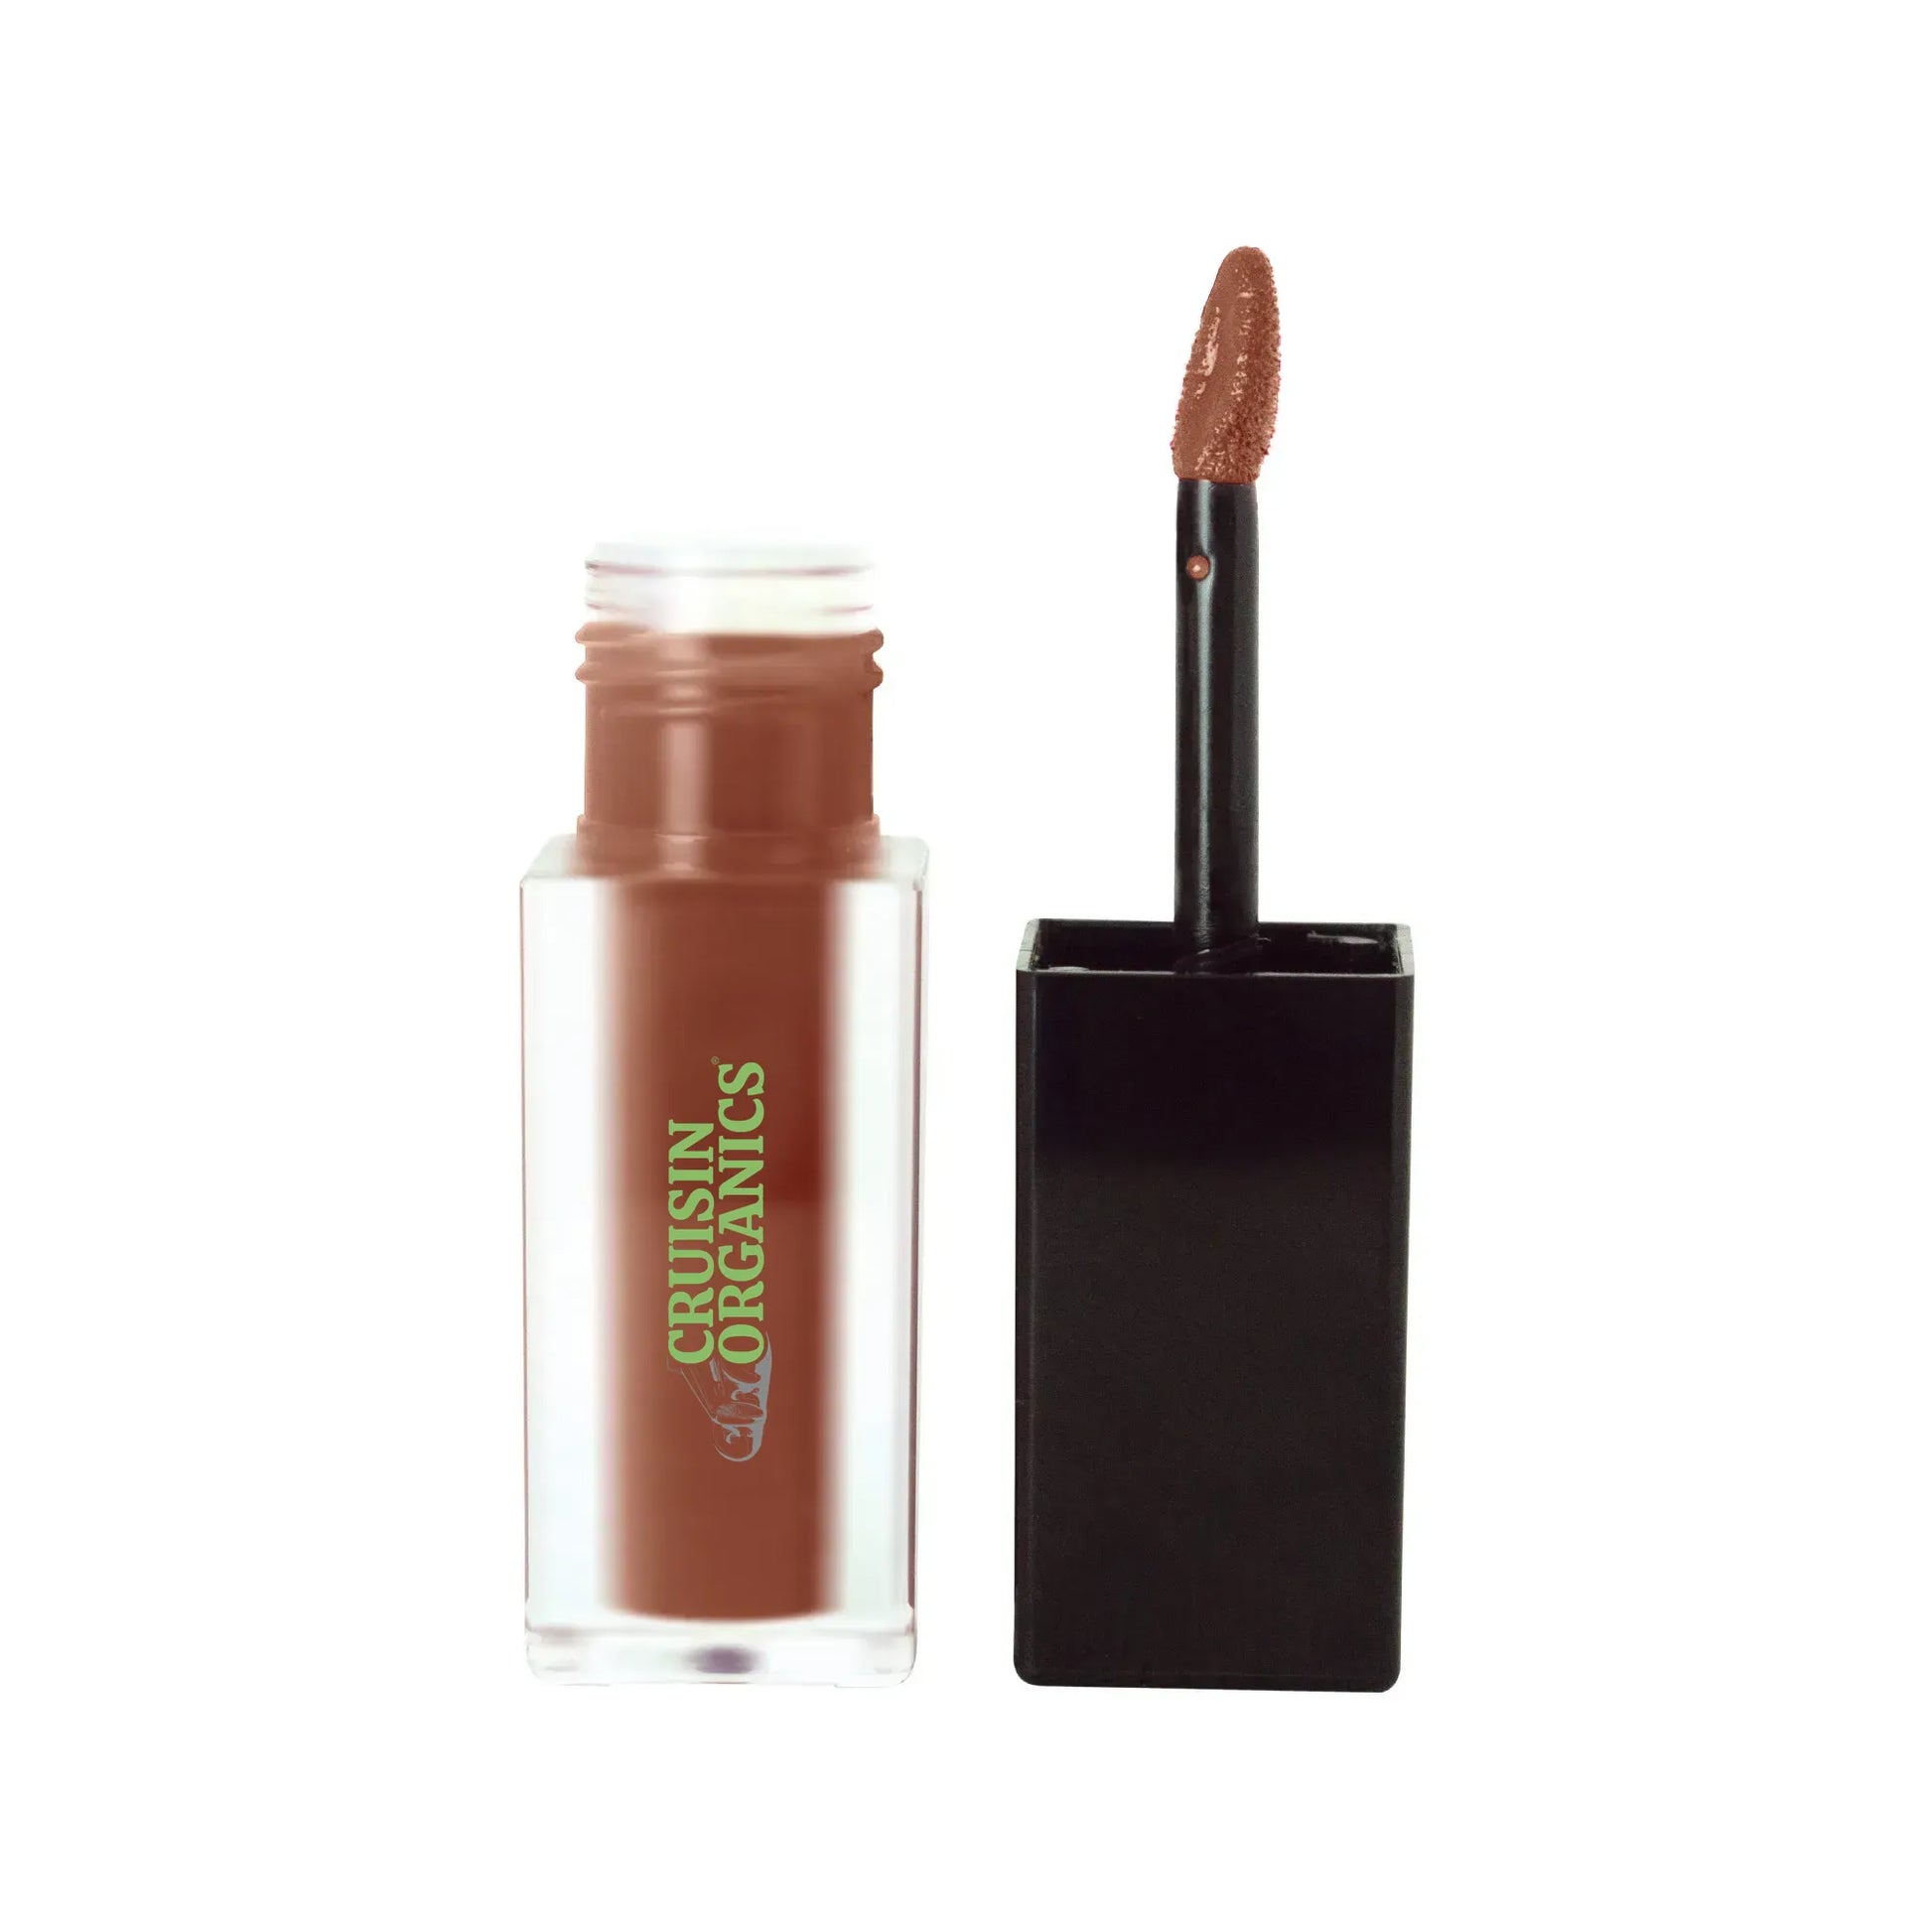 Indulge in the luxurious Chocolatte Kiss Matte Lip Stain Vit E by Cruisin Organics. This velvety lip stain effortlessly glides on, leaving behind a soft and vibrant finish. Enriched with vitamin E, it will keep your lips nourished and kissable all day long. Elevate your look and feel confident with every application.